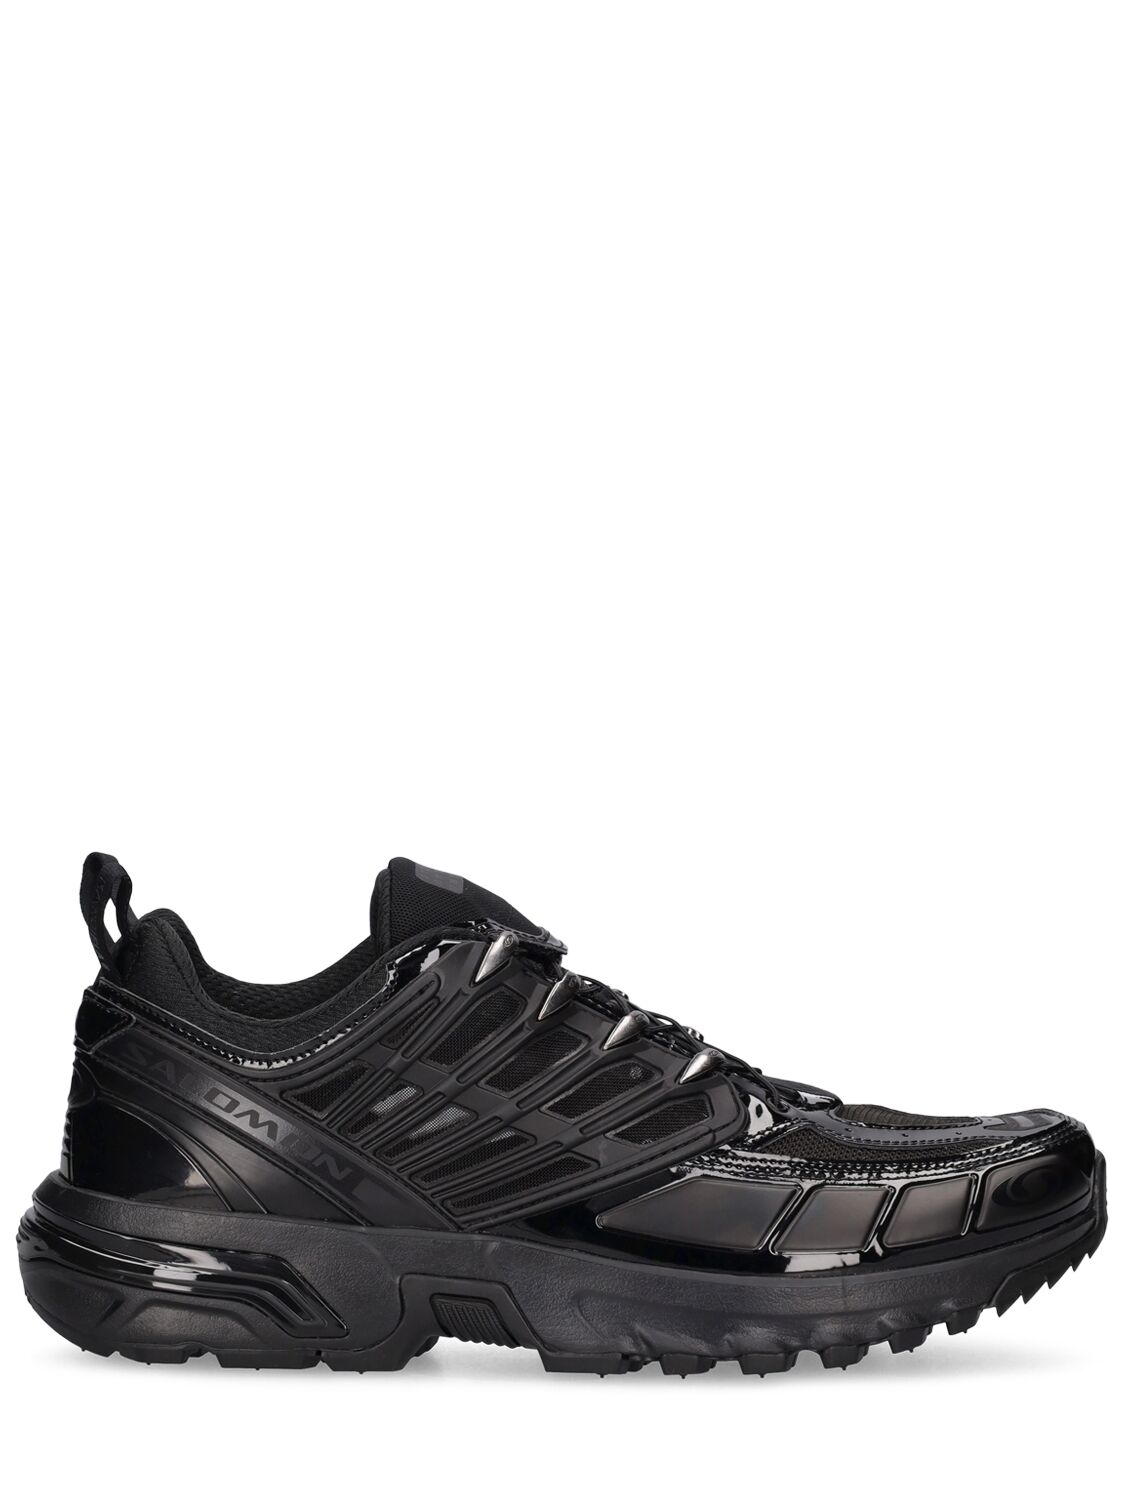 Mm6 Maison Margiela Acs Pro Colorblock Caged Runner Sneakers In Black